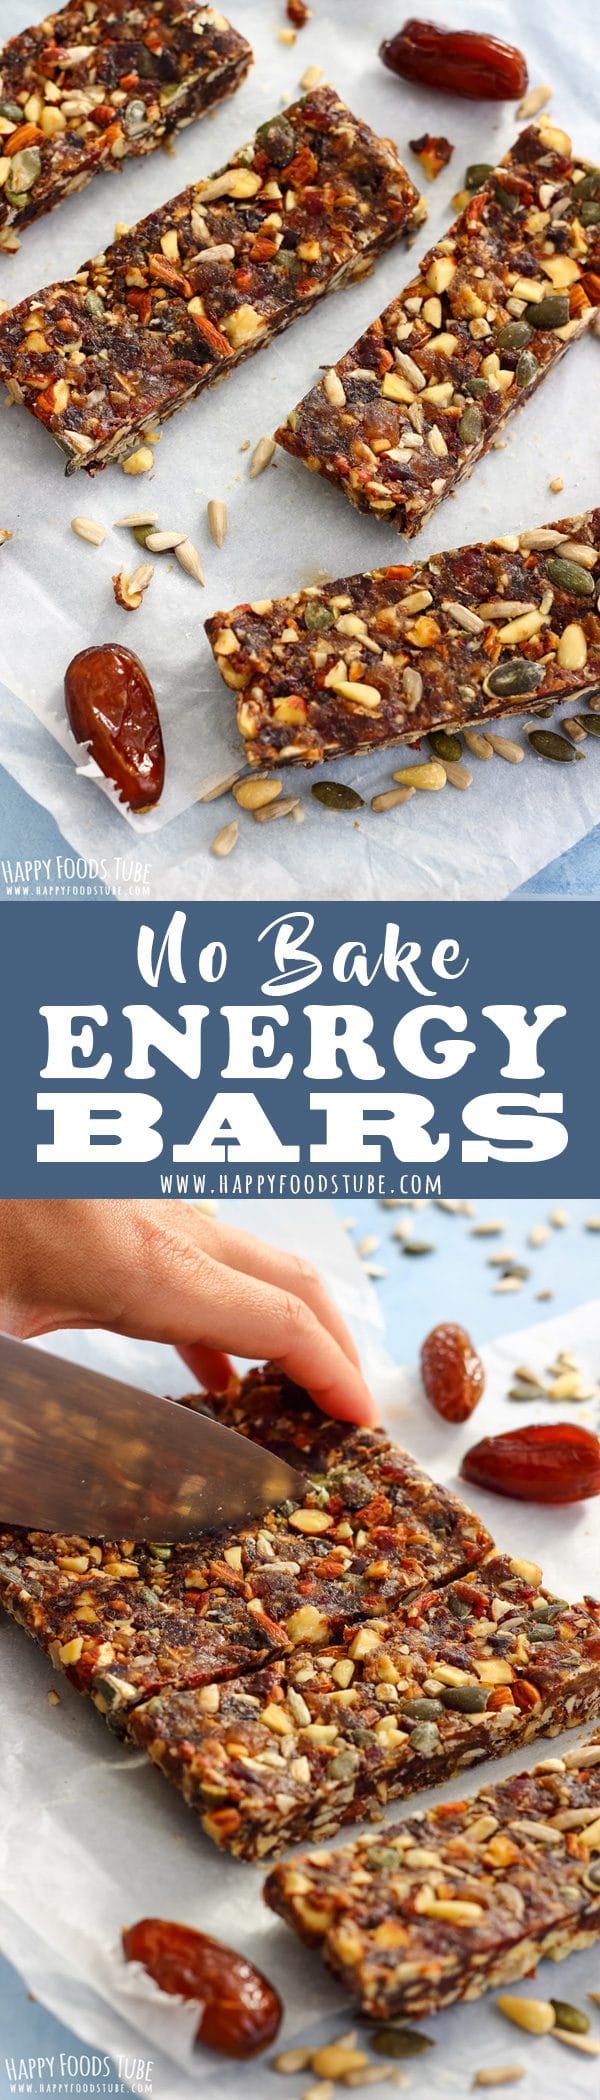 No Bake Energy Bars Recipe Picture